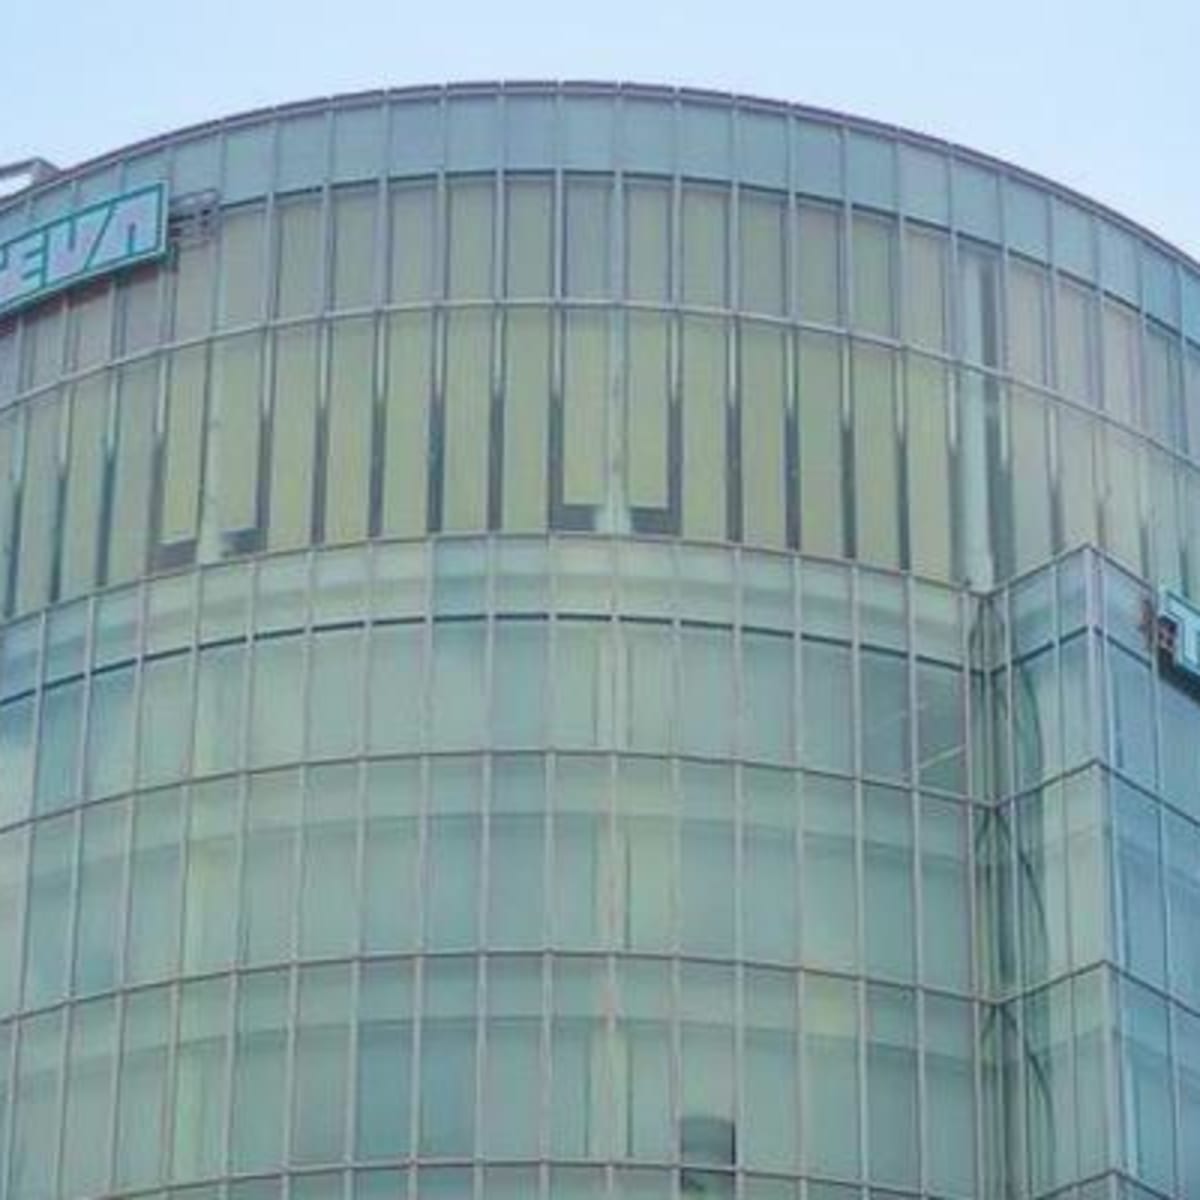 Teva Surges Once Again on $1.1 Sale and New - TheStreet